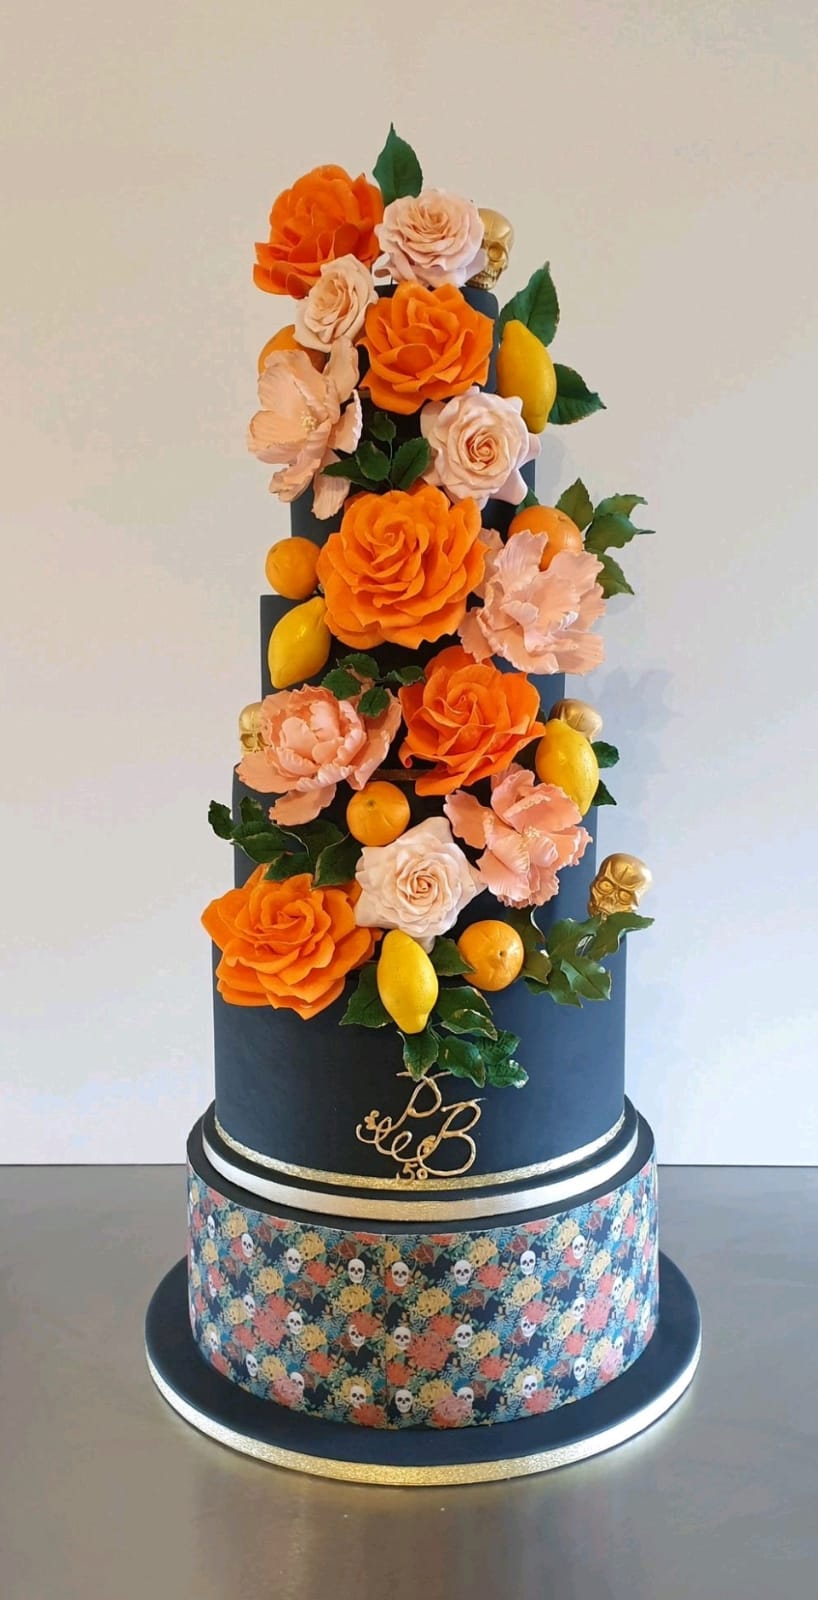 Stunning Bespoke luxury cakes for any occasion By Yevnig London